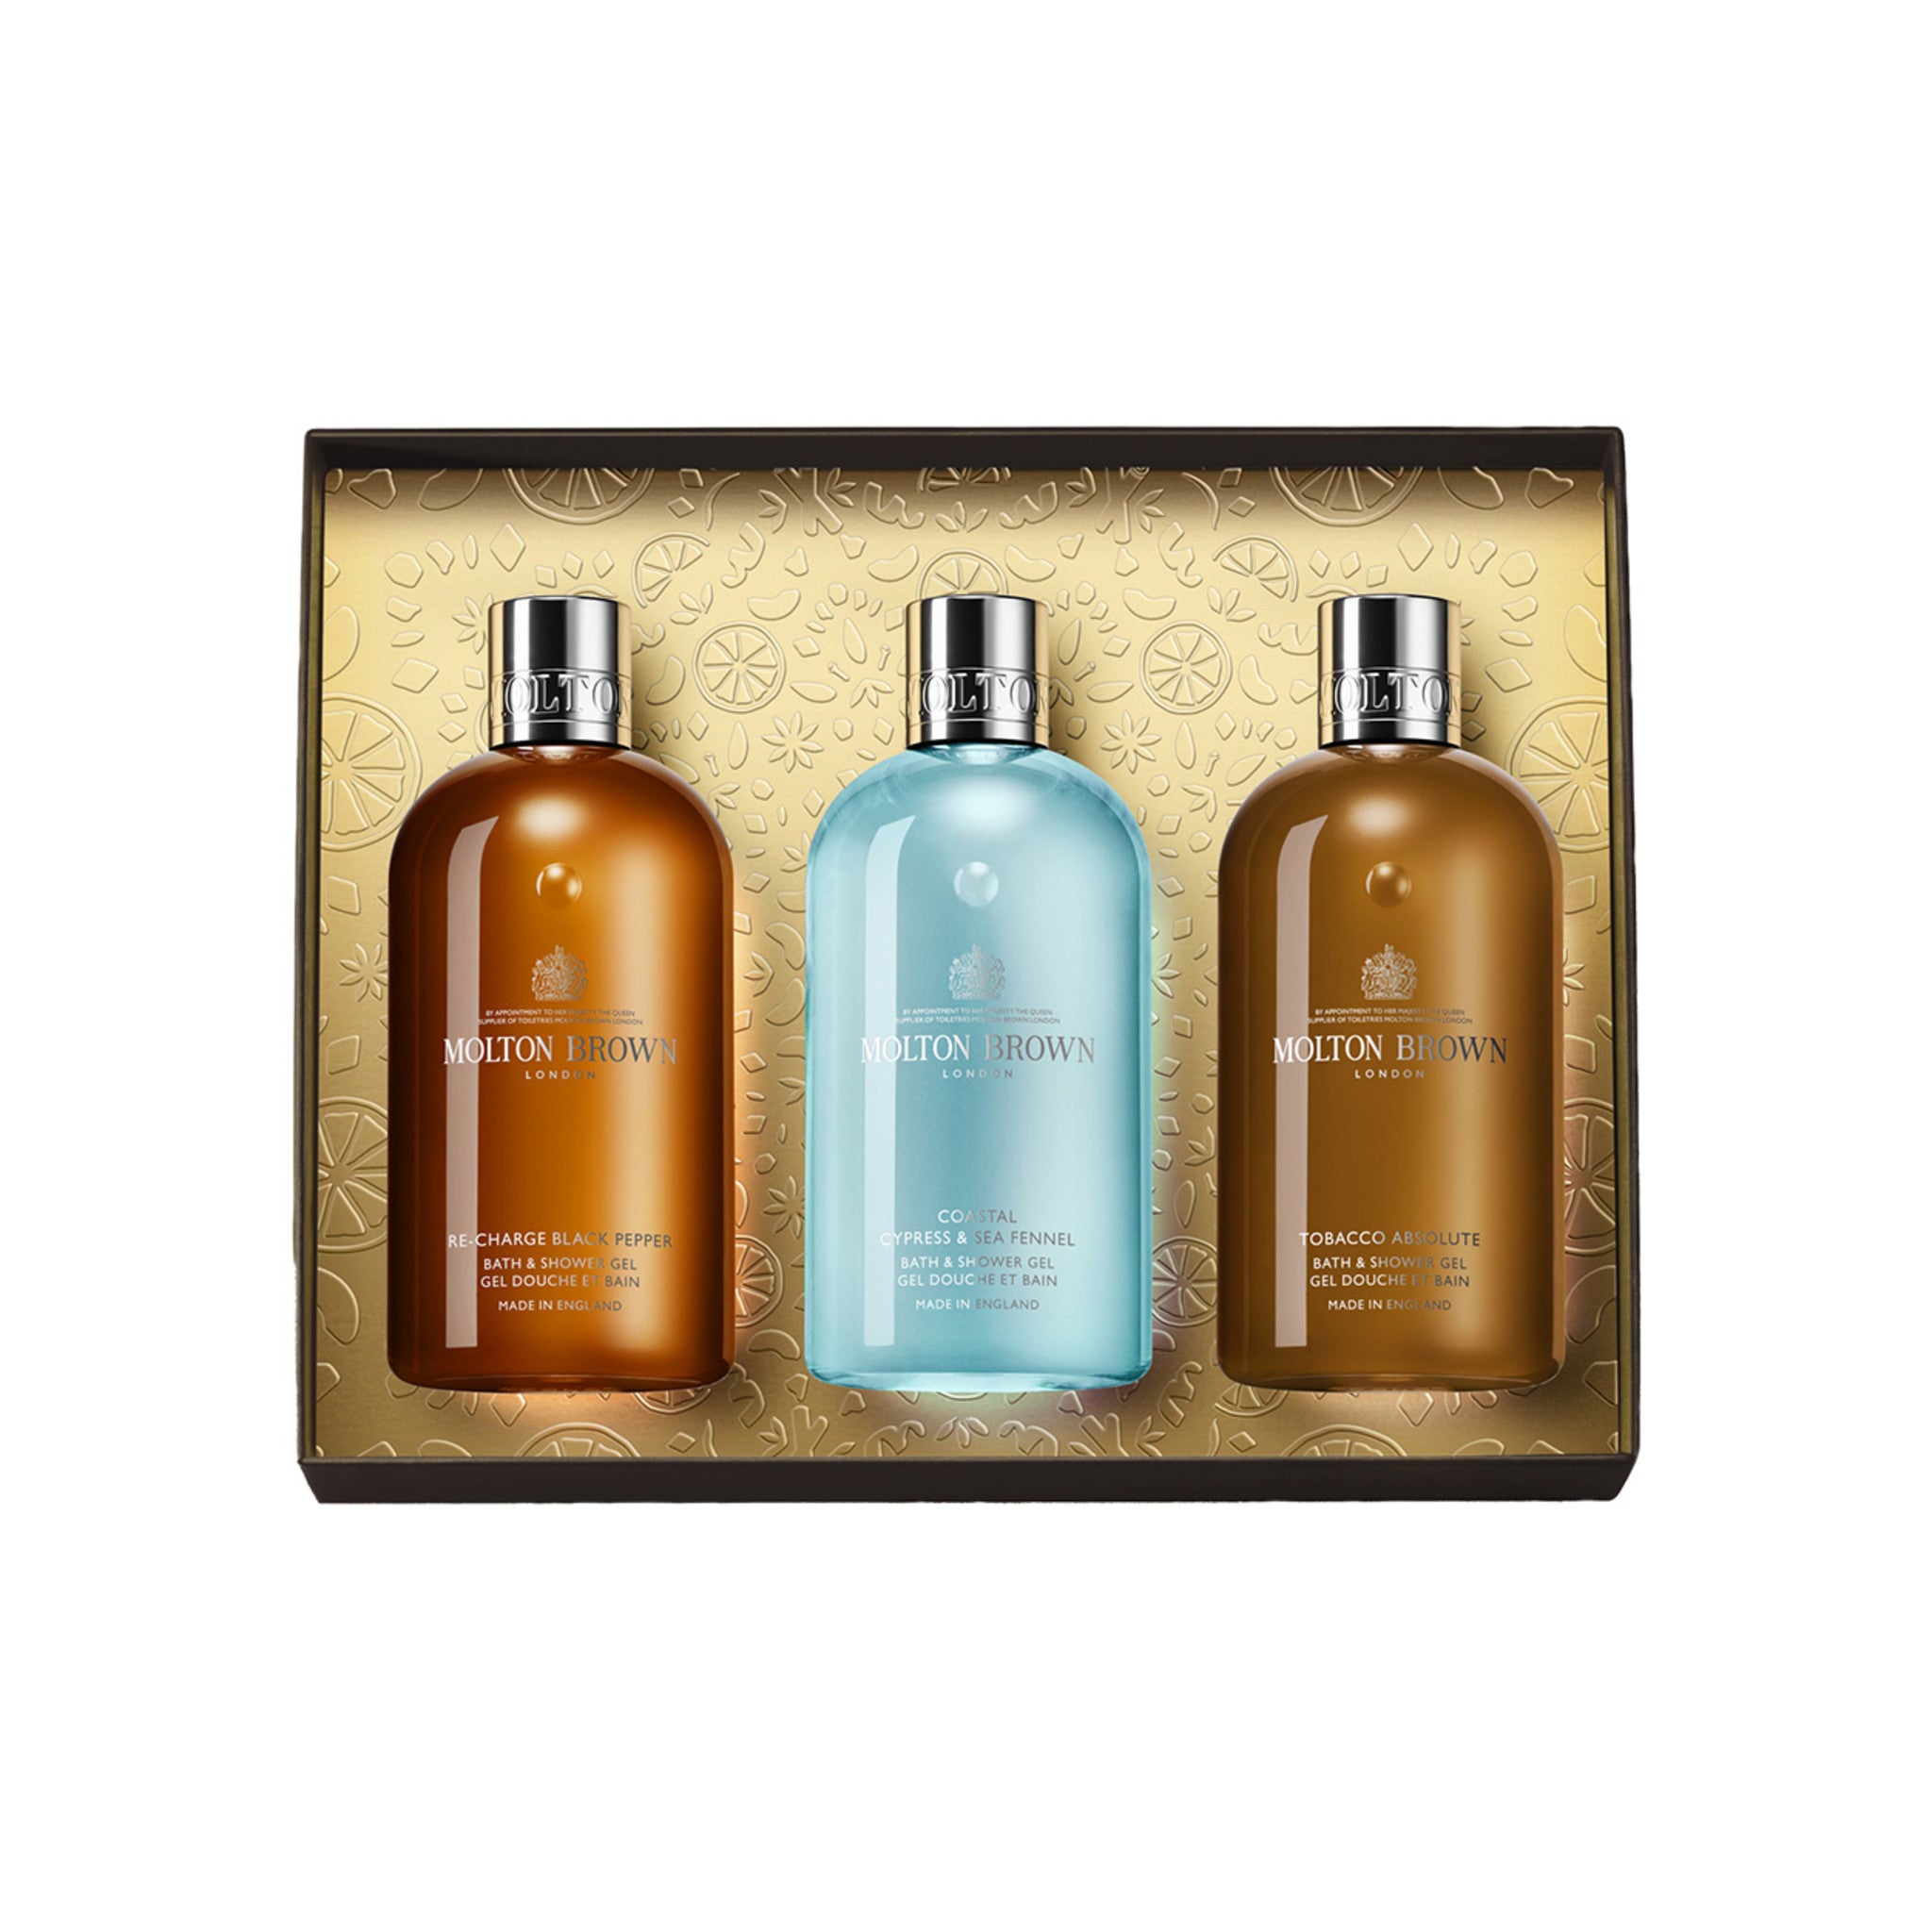 Molton Brown Woody and Aromatic Body Care Gift Set (Limited